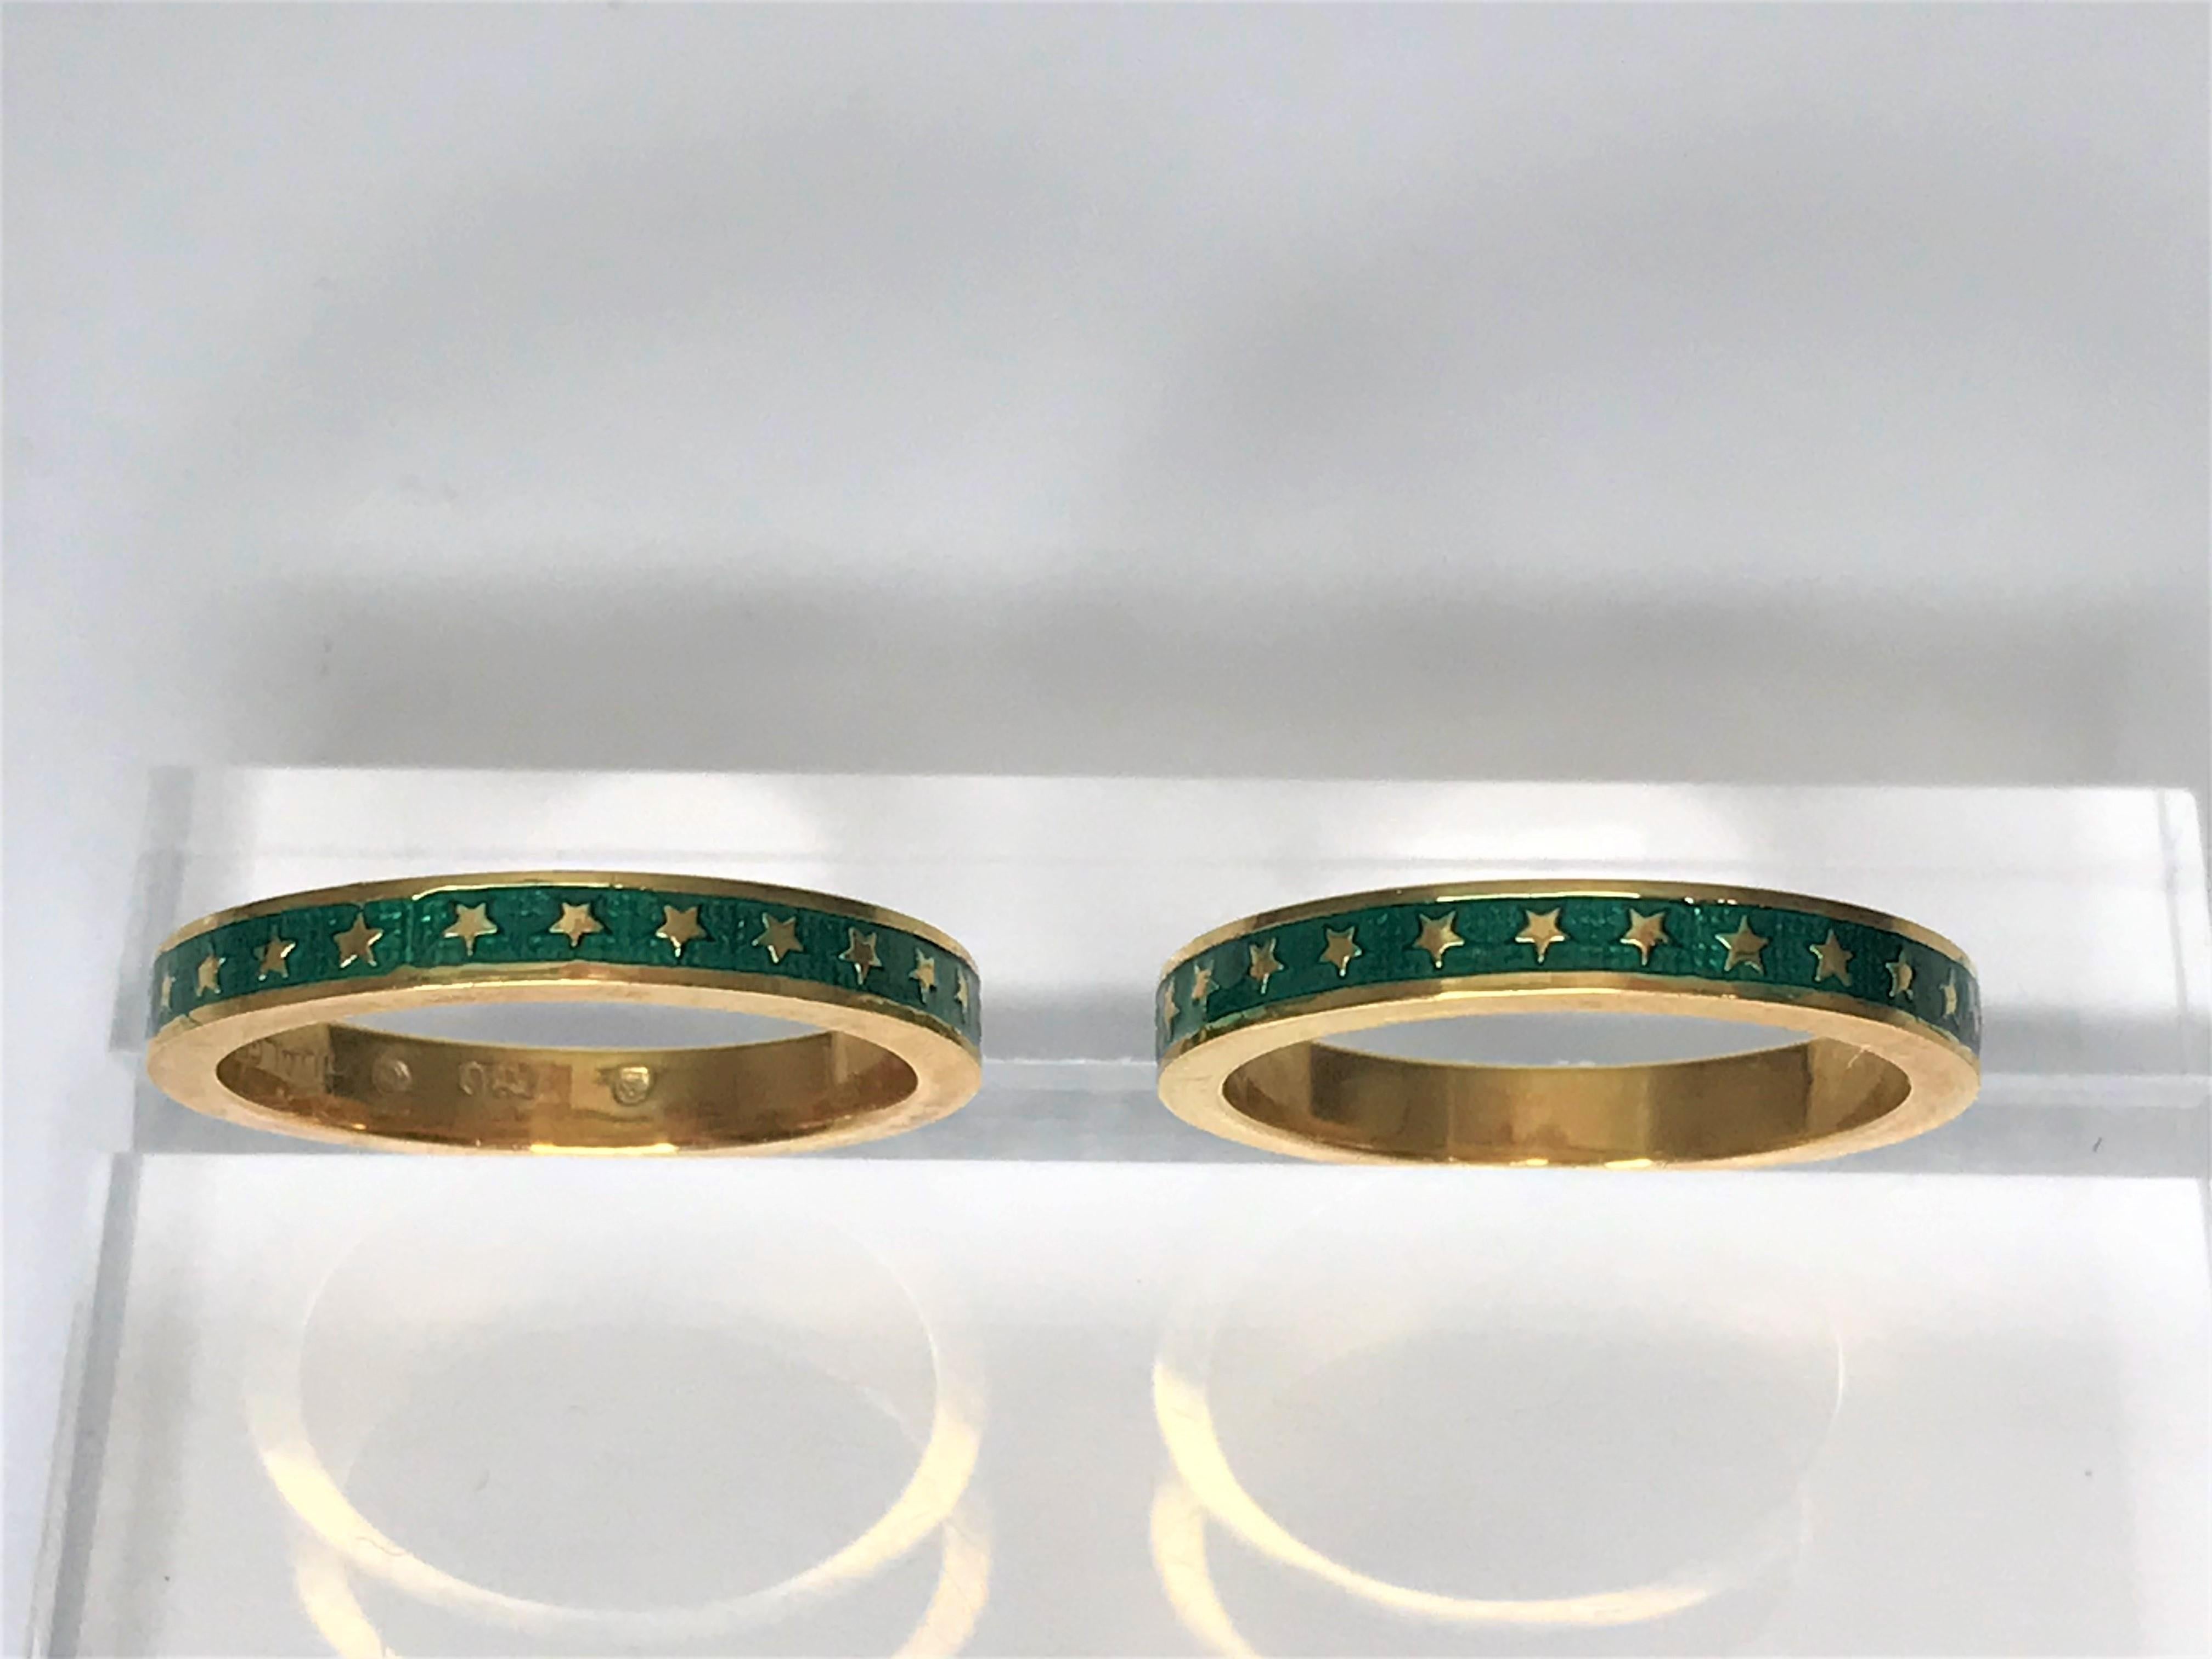 By designer Hidalgo, these bands are great on their own or stacked with other rings.
Both 3mm bands are 18 karat yellow gold
Green enamel with gold star accents
Stamped 